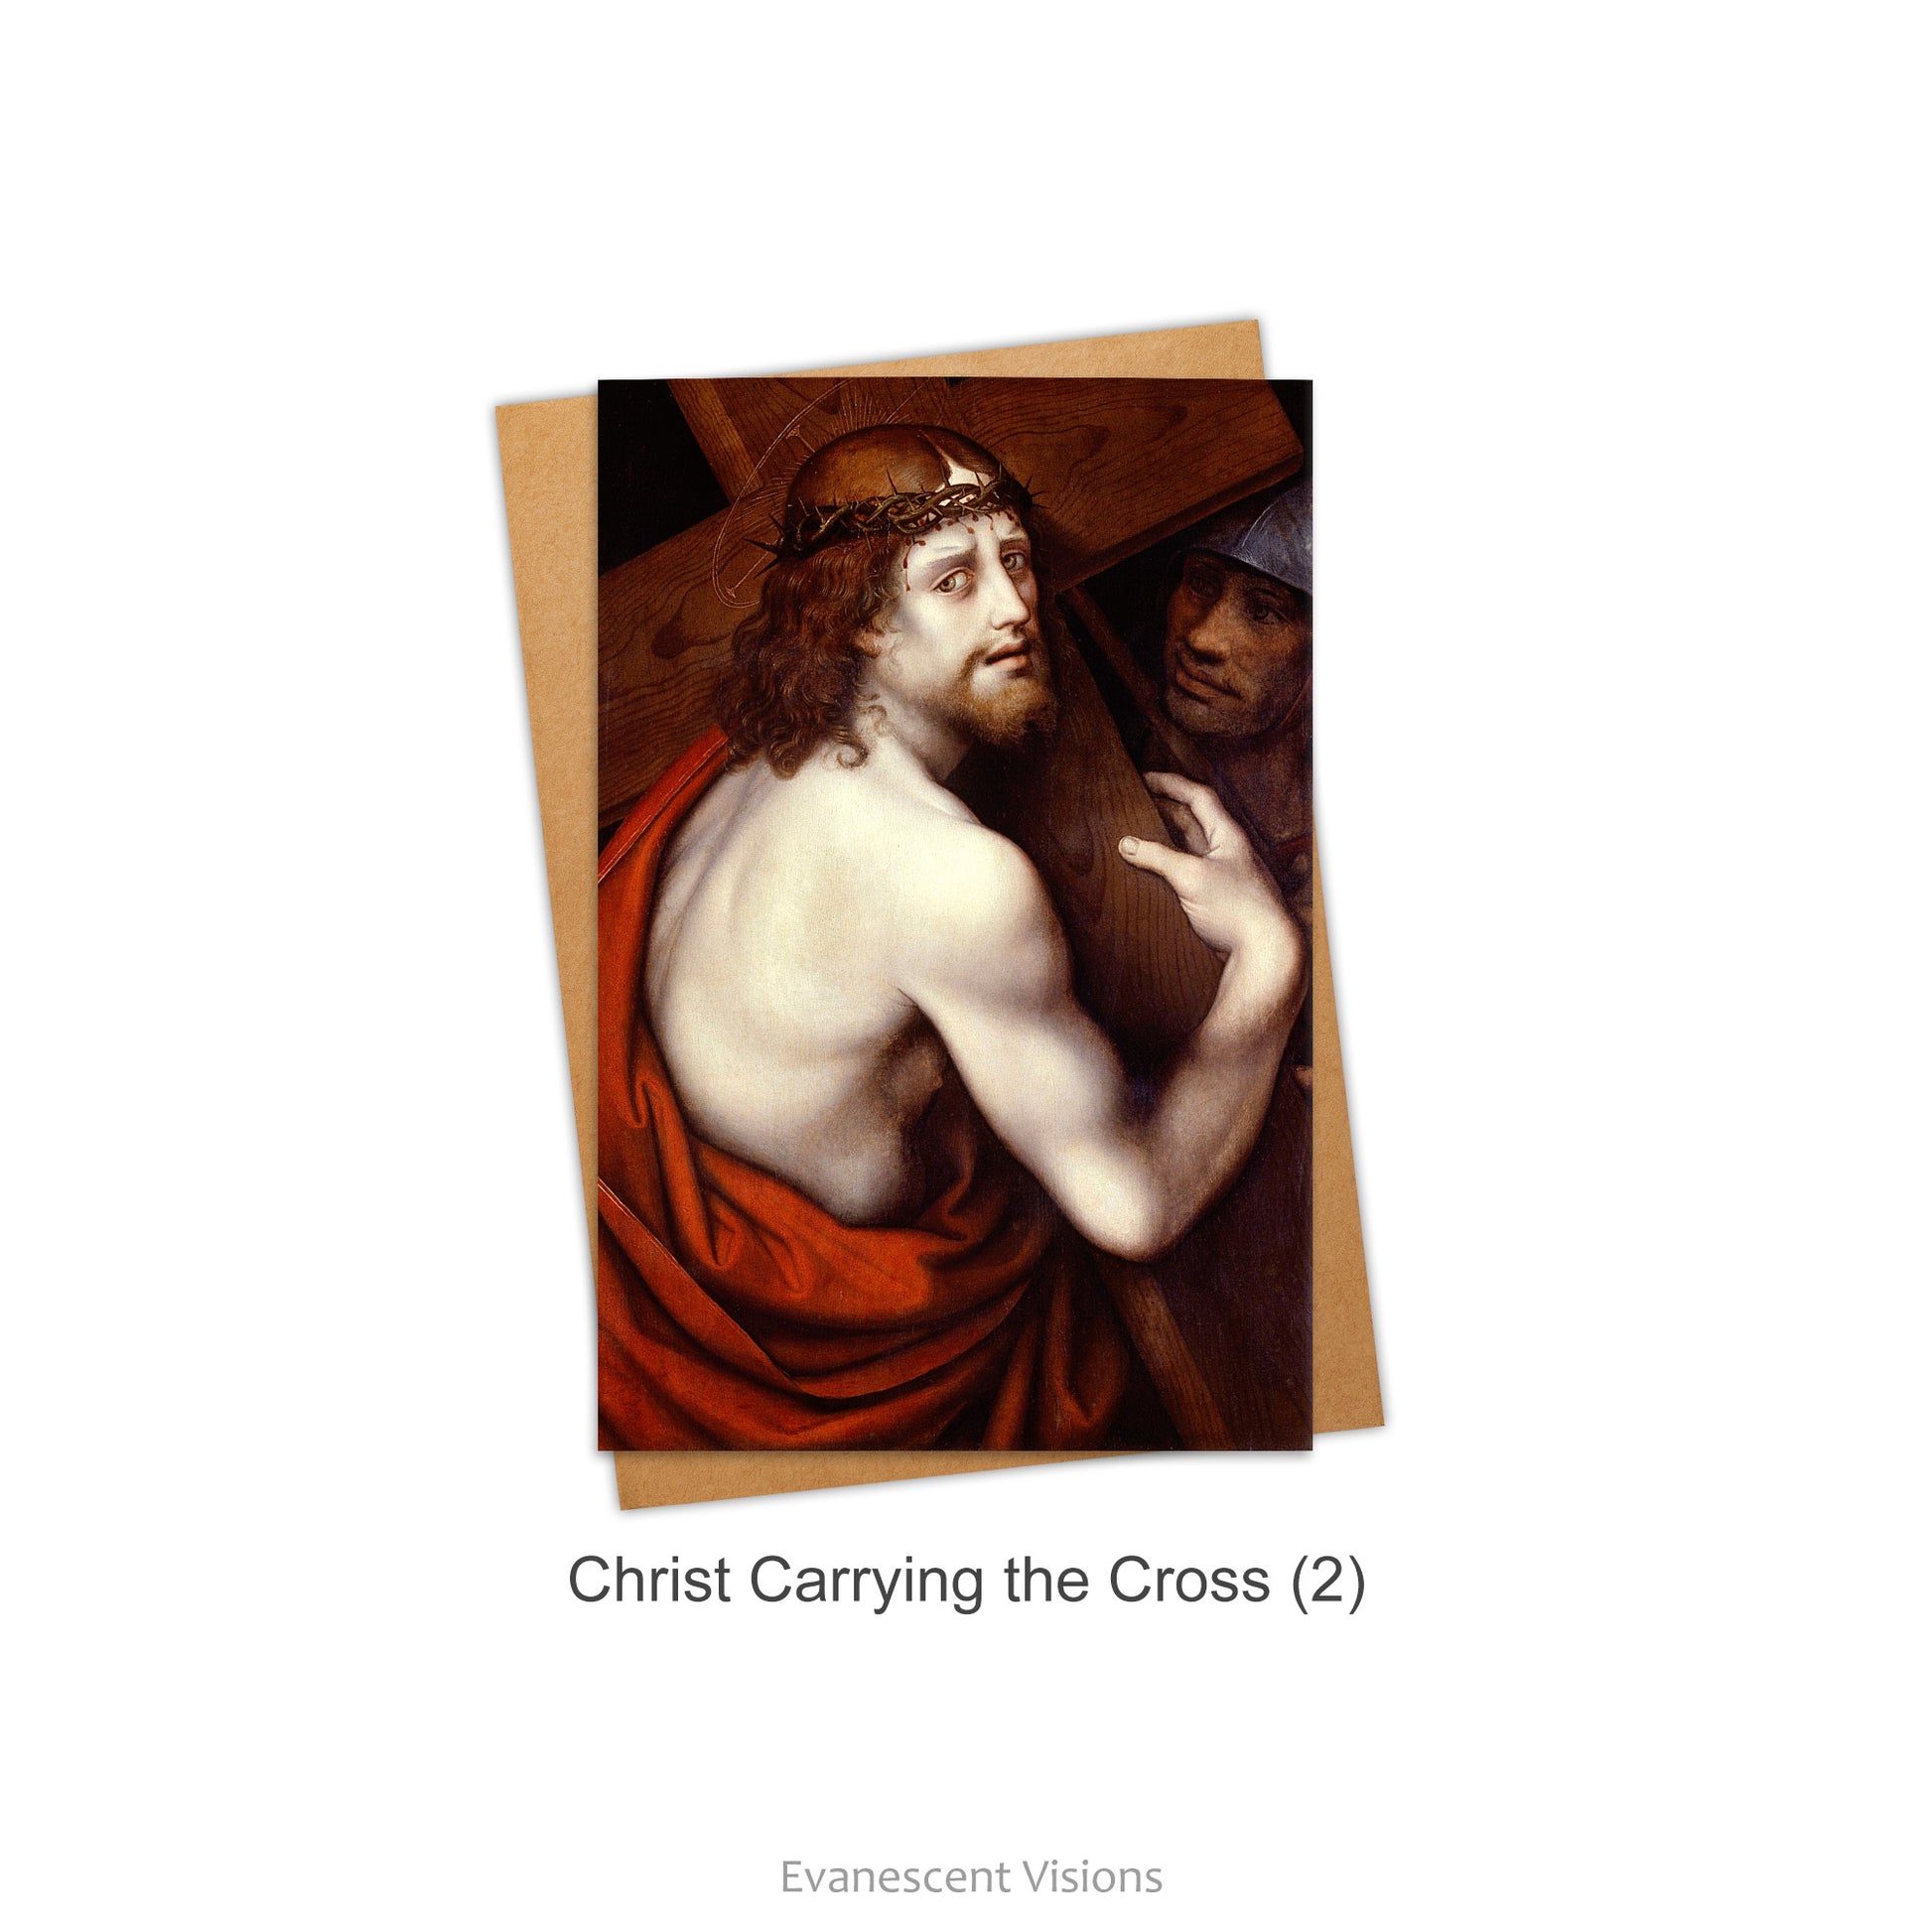 Card with envelope. Card has image from the painting 'Christ Carrying the Cross' by Giampietrino